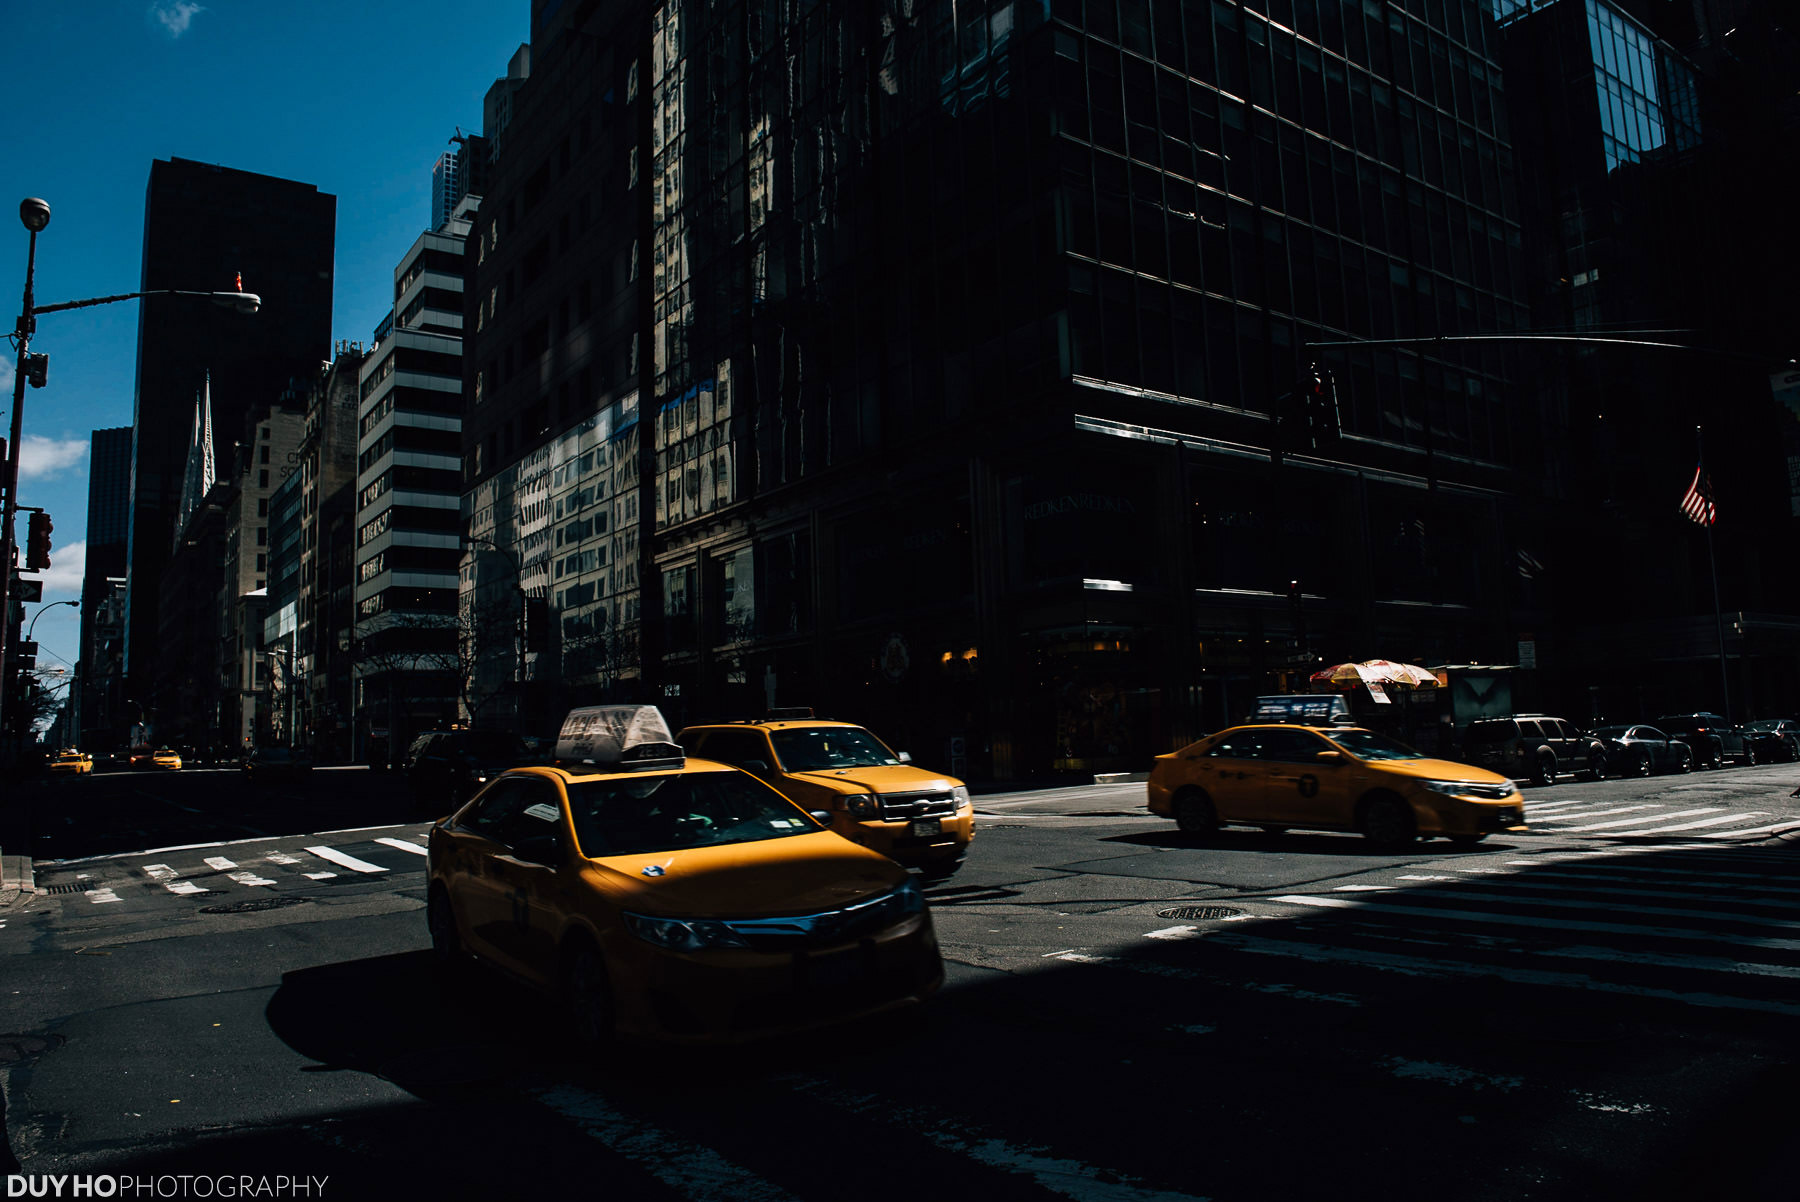 Taxi Cabs in NYC